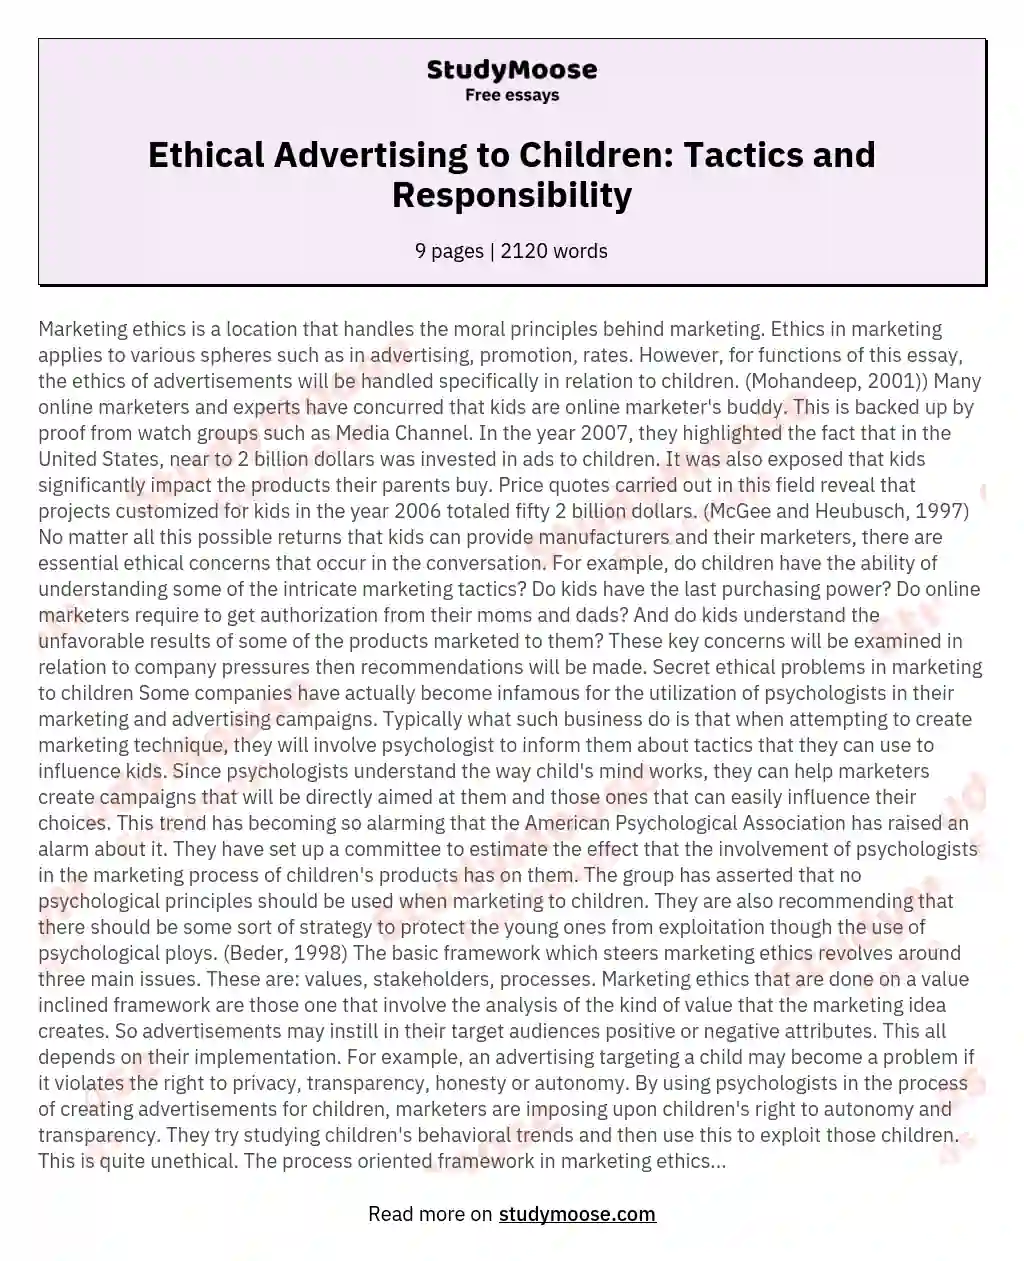 Ethical Advertising to Children: Tactics and Responsibility essay